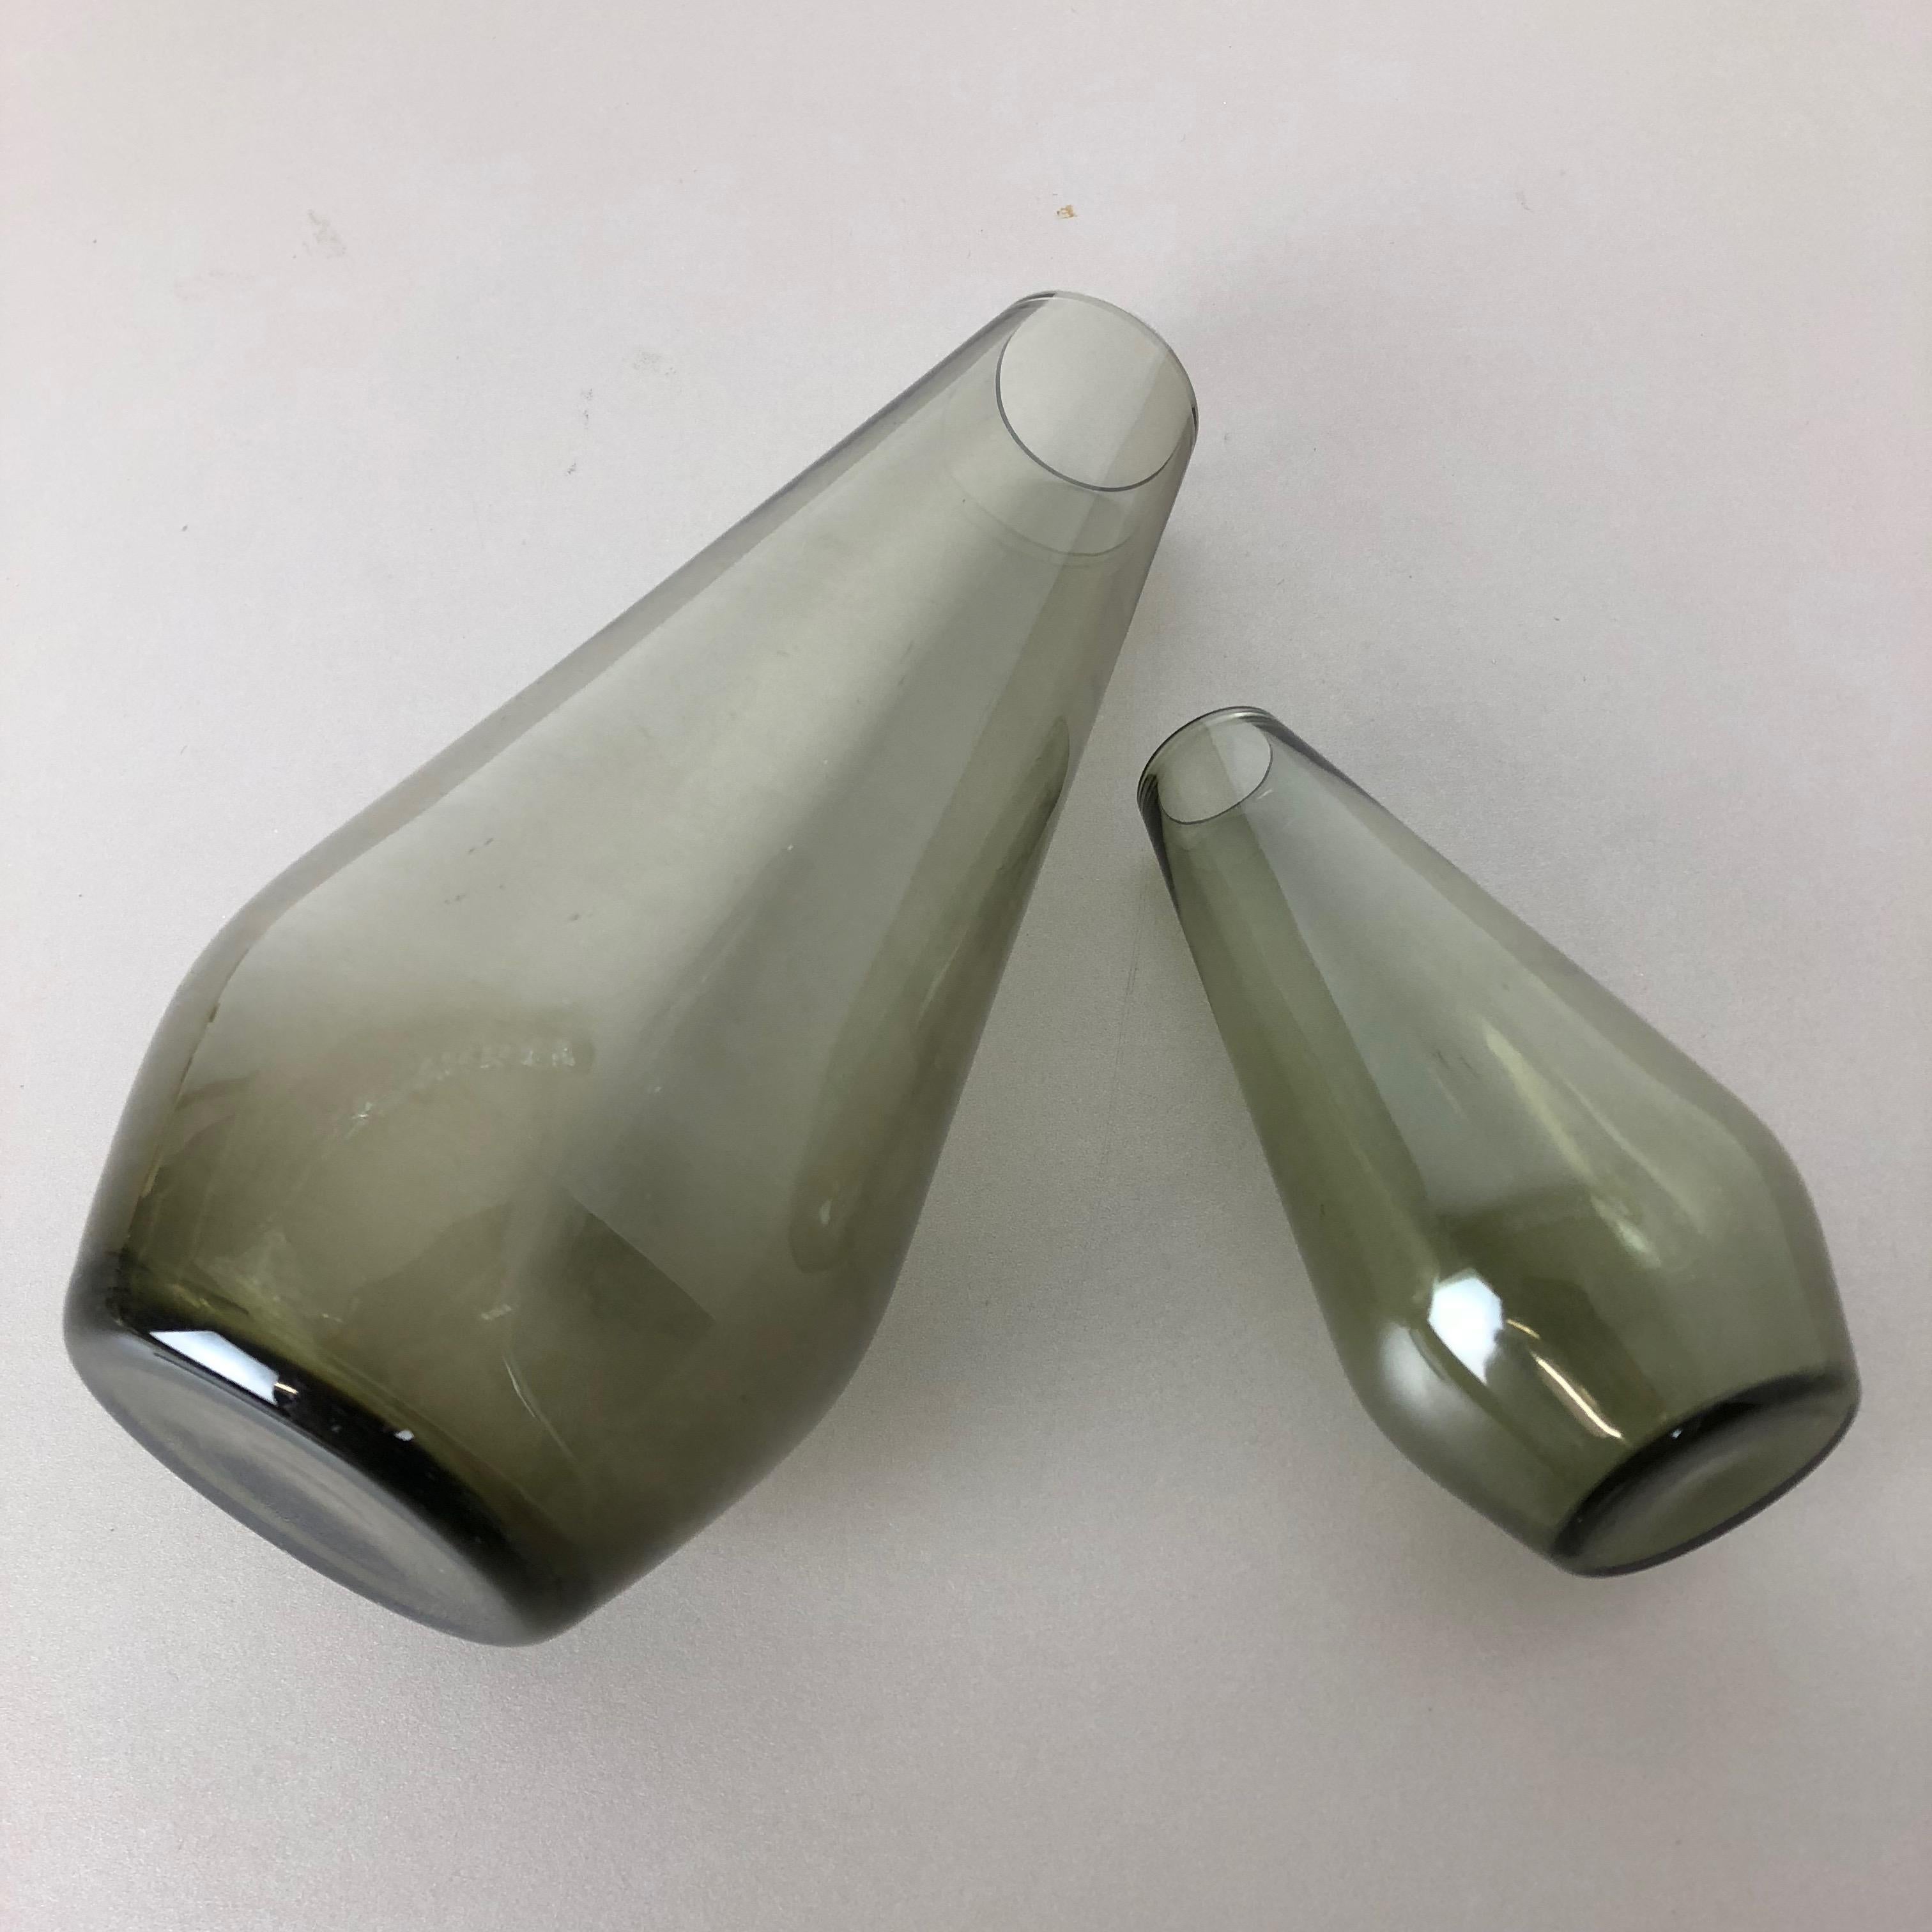 Vintage 1960s Set of 2 Turmaline Vases by Wilhelm Wagenfeld for WMF, Germany For Sale 5